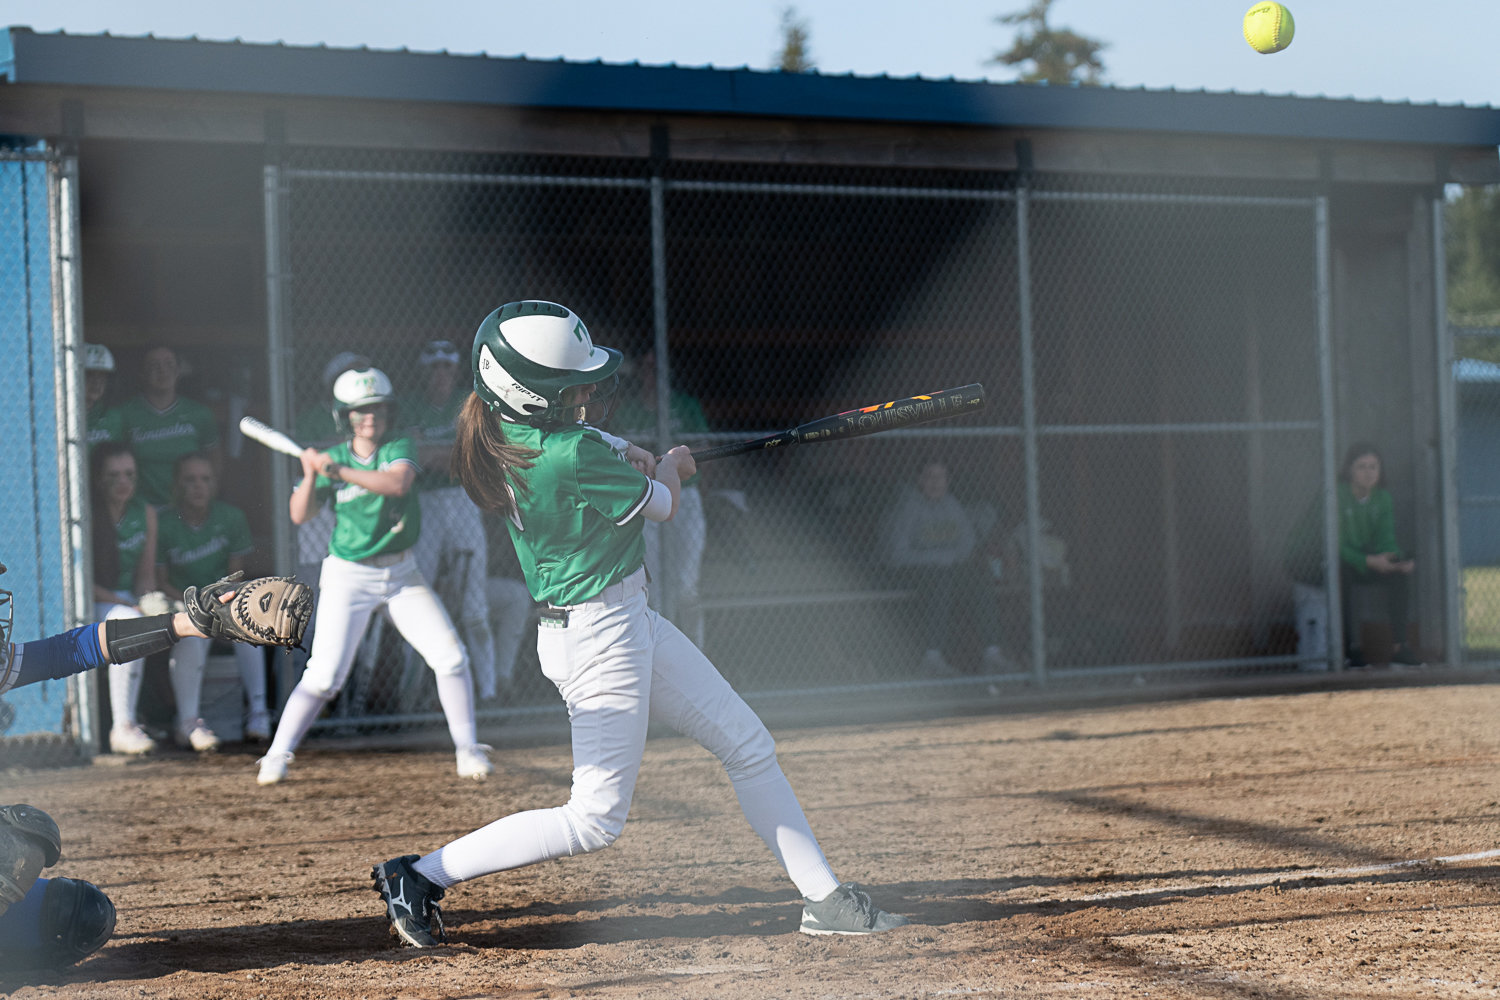 Chloe Foos pops a bloop in for an RBI single to put Tumwater ahead in its 5-3 win over Rochester on March 29.